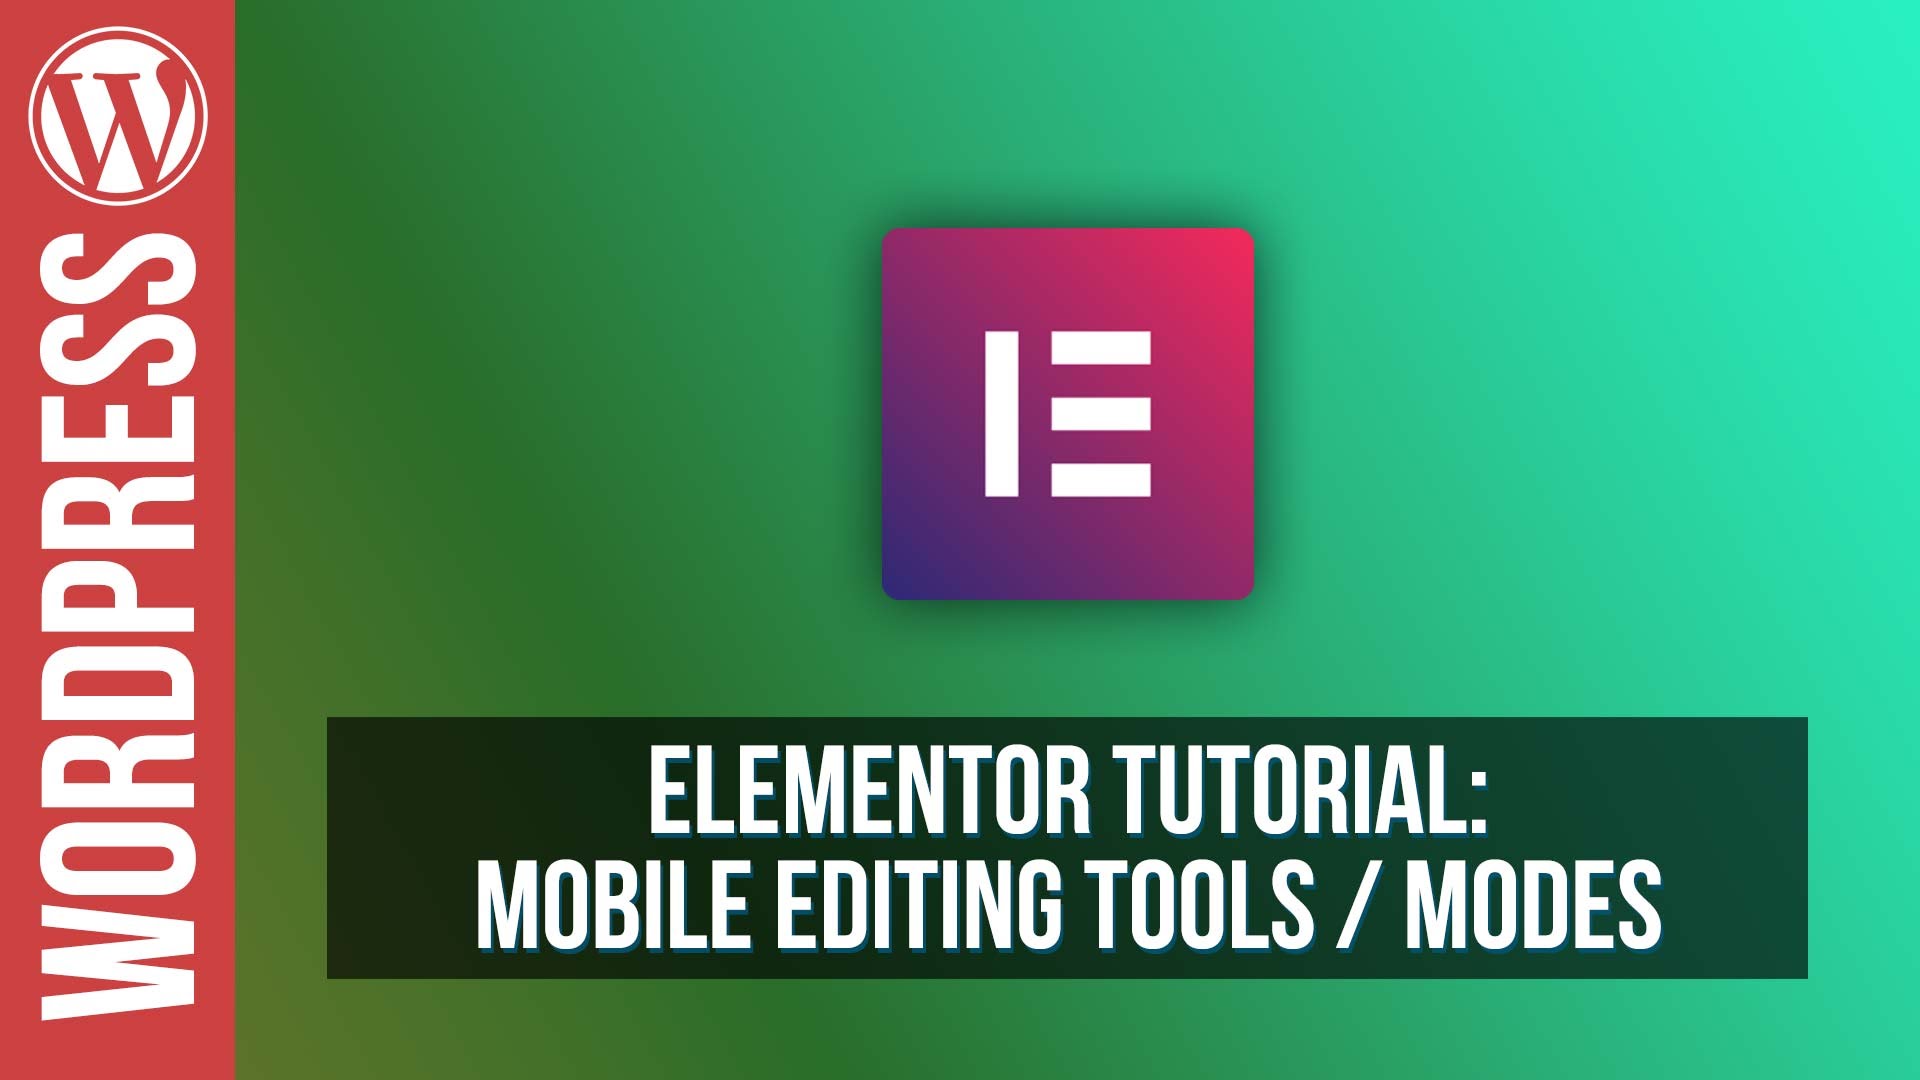 How To Use Mobile Editing in Elementor for WordPress – Tutorial